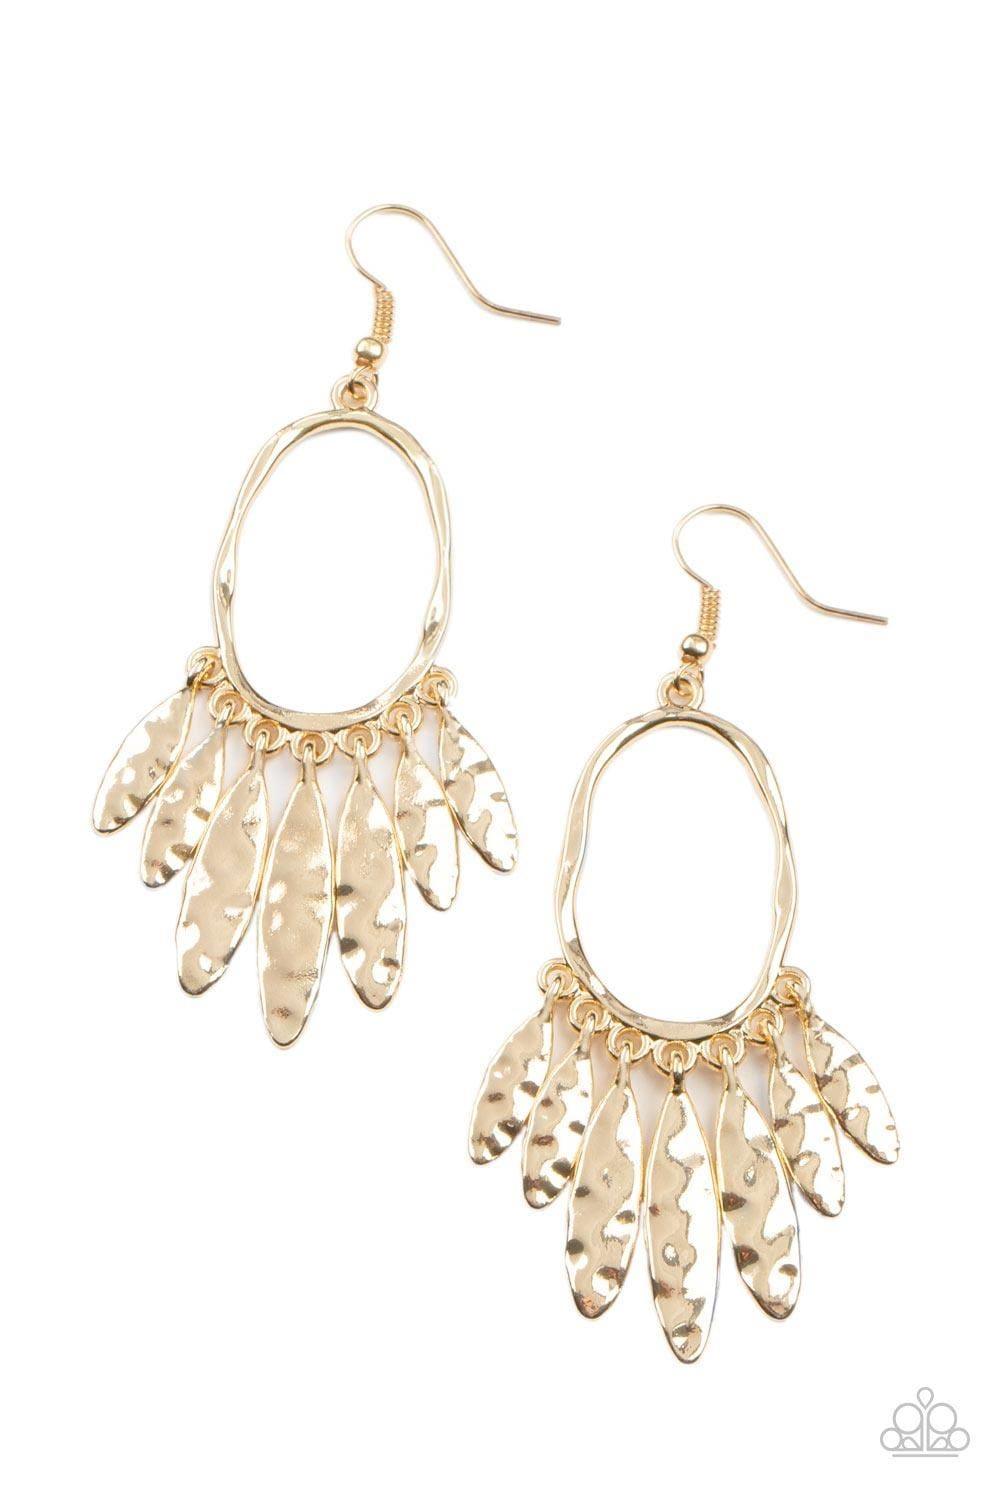 Paparazzi Accessories - Artisan Aria - Gold Earrings - Bling by JessieK